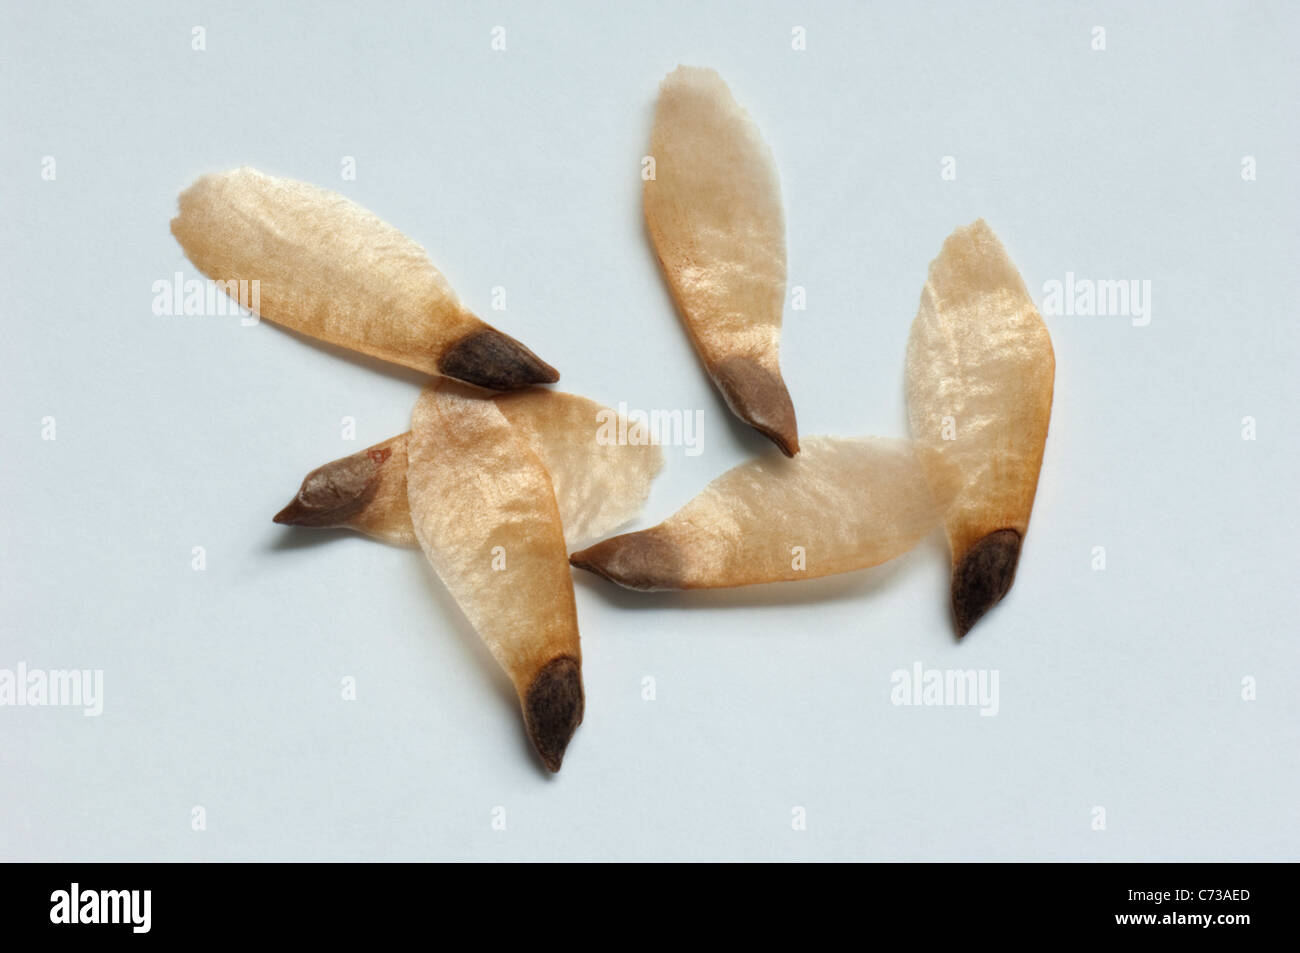 Common Spruce, Norway Spruce (Picea abies), seeds. Studio picture against a white background. Stock Photo